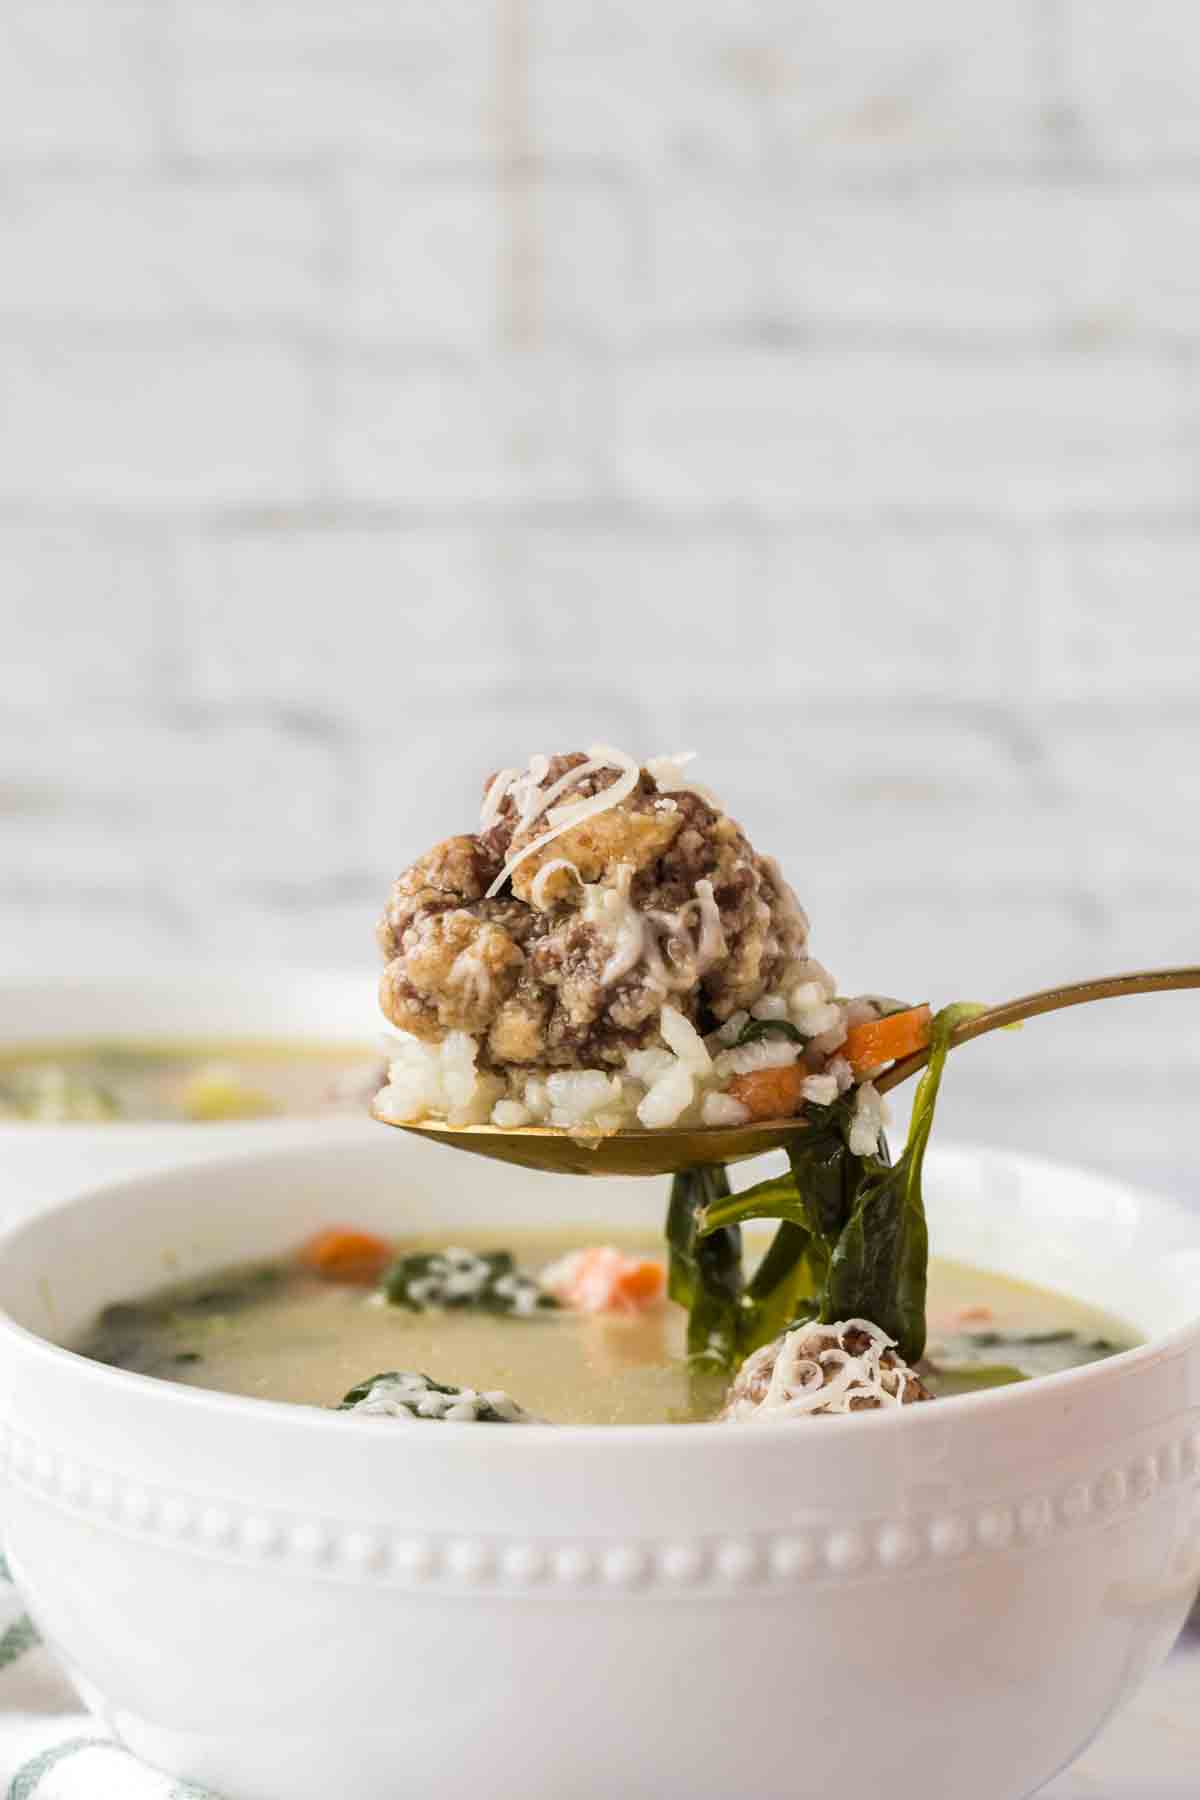 POV side view of a spoonful of italian wedding soup over a white bowl